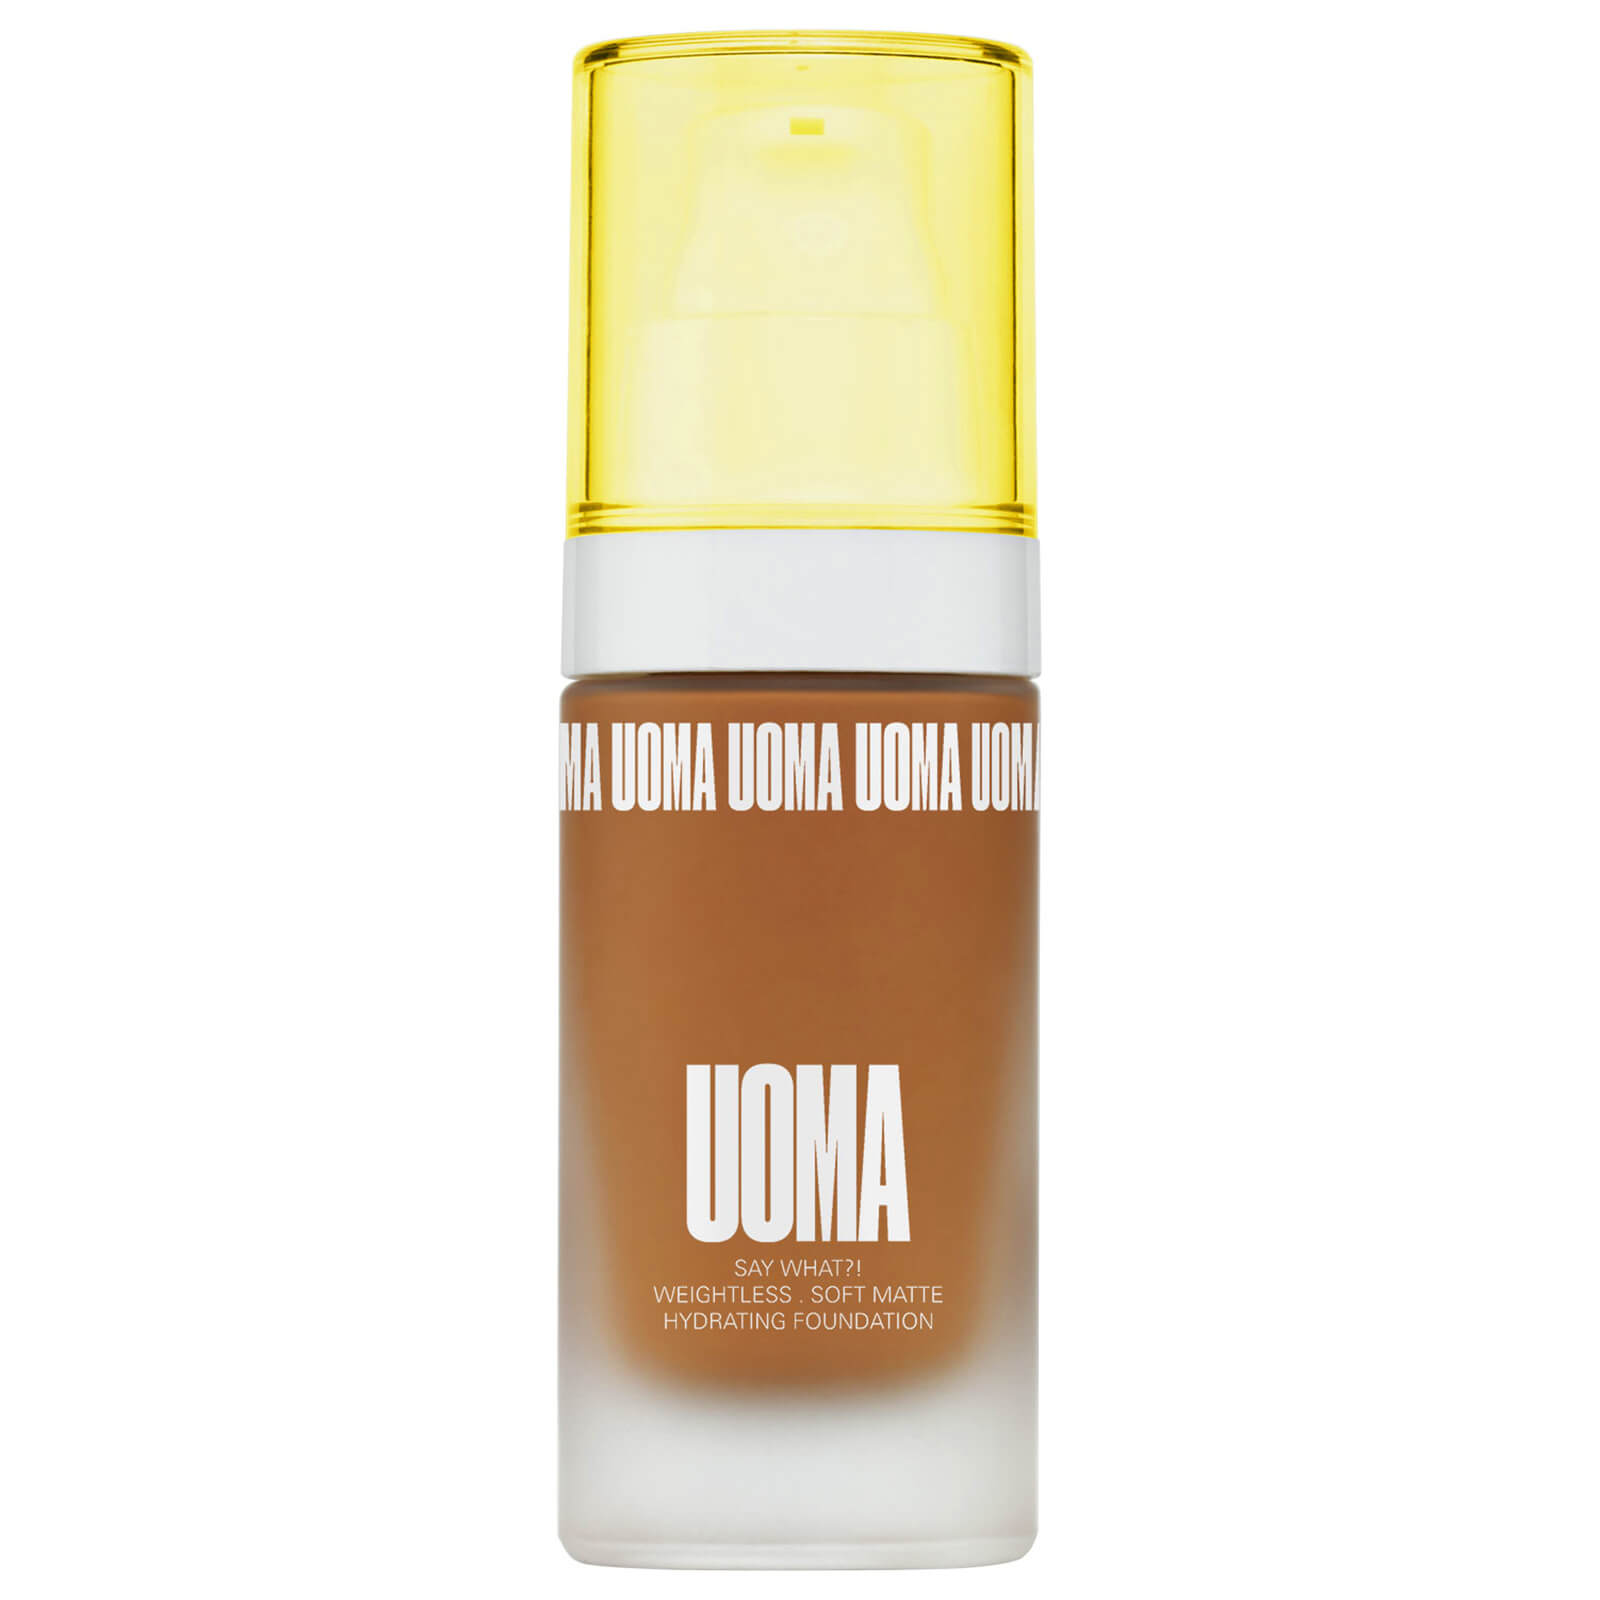 UOMA Beauty Say What Foundation 30ml (Various Shades) - Bronze Venus T2W von UOMA